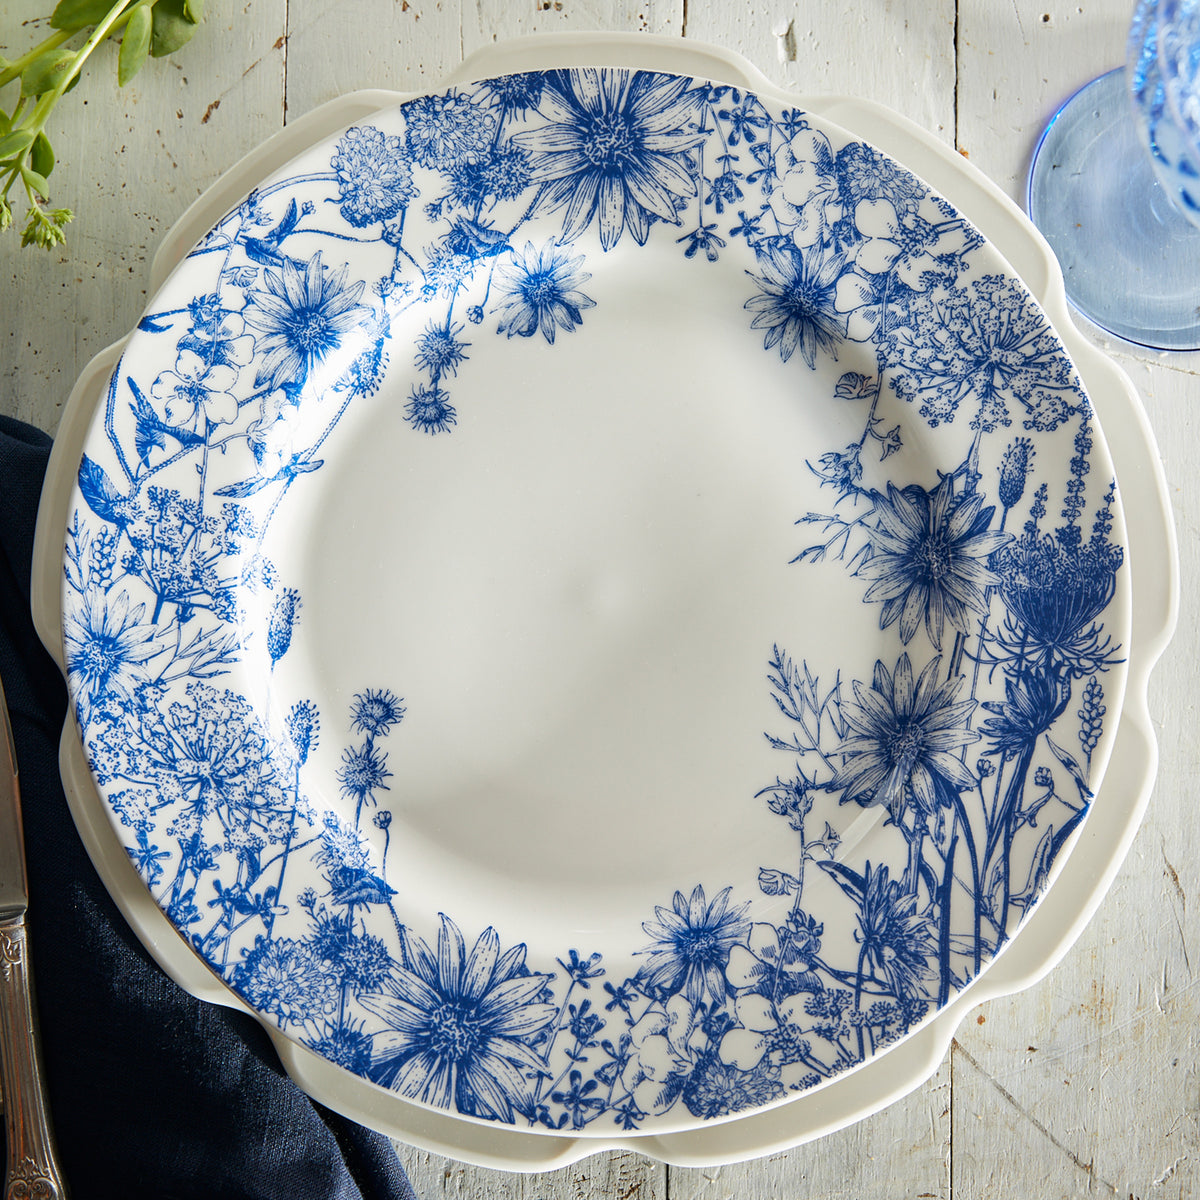 A blue and white Grace White Dinner Plate by Caskata Artisanal Home adorned with graceful flowers.